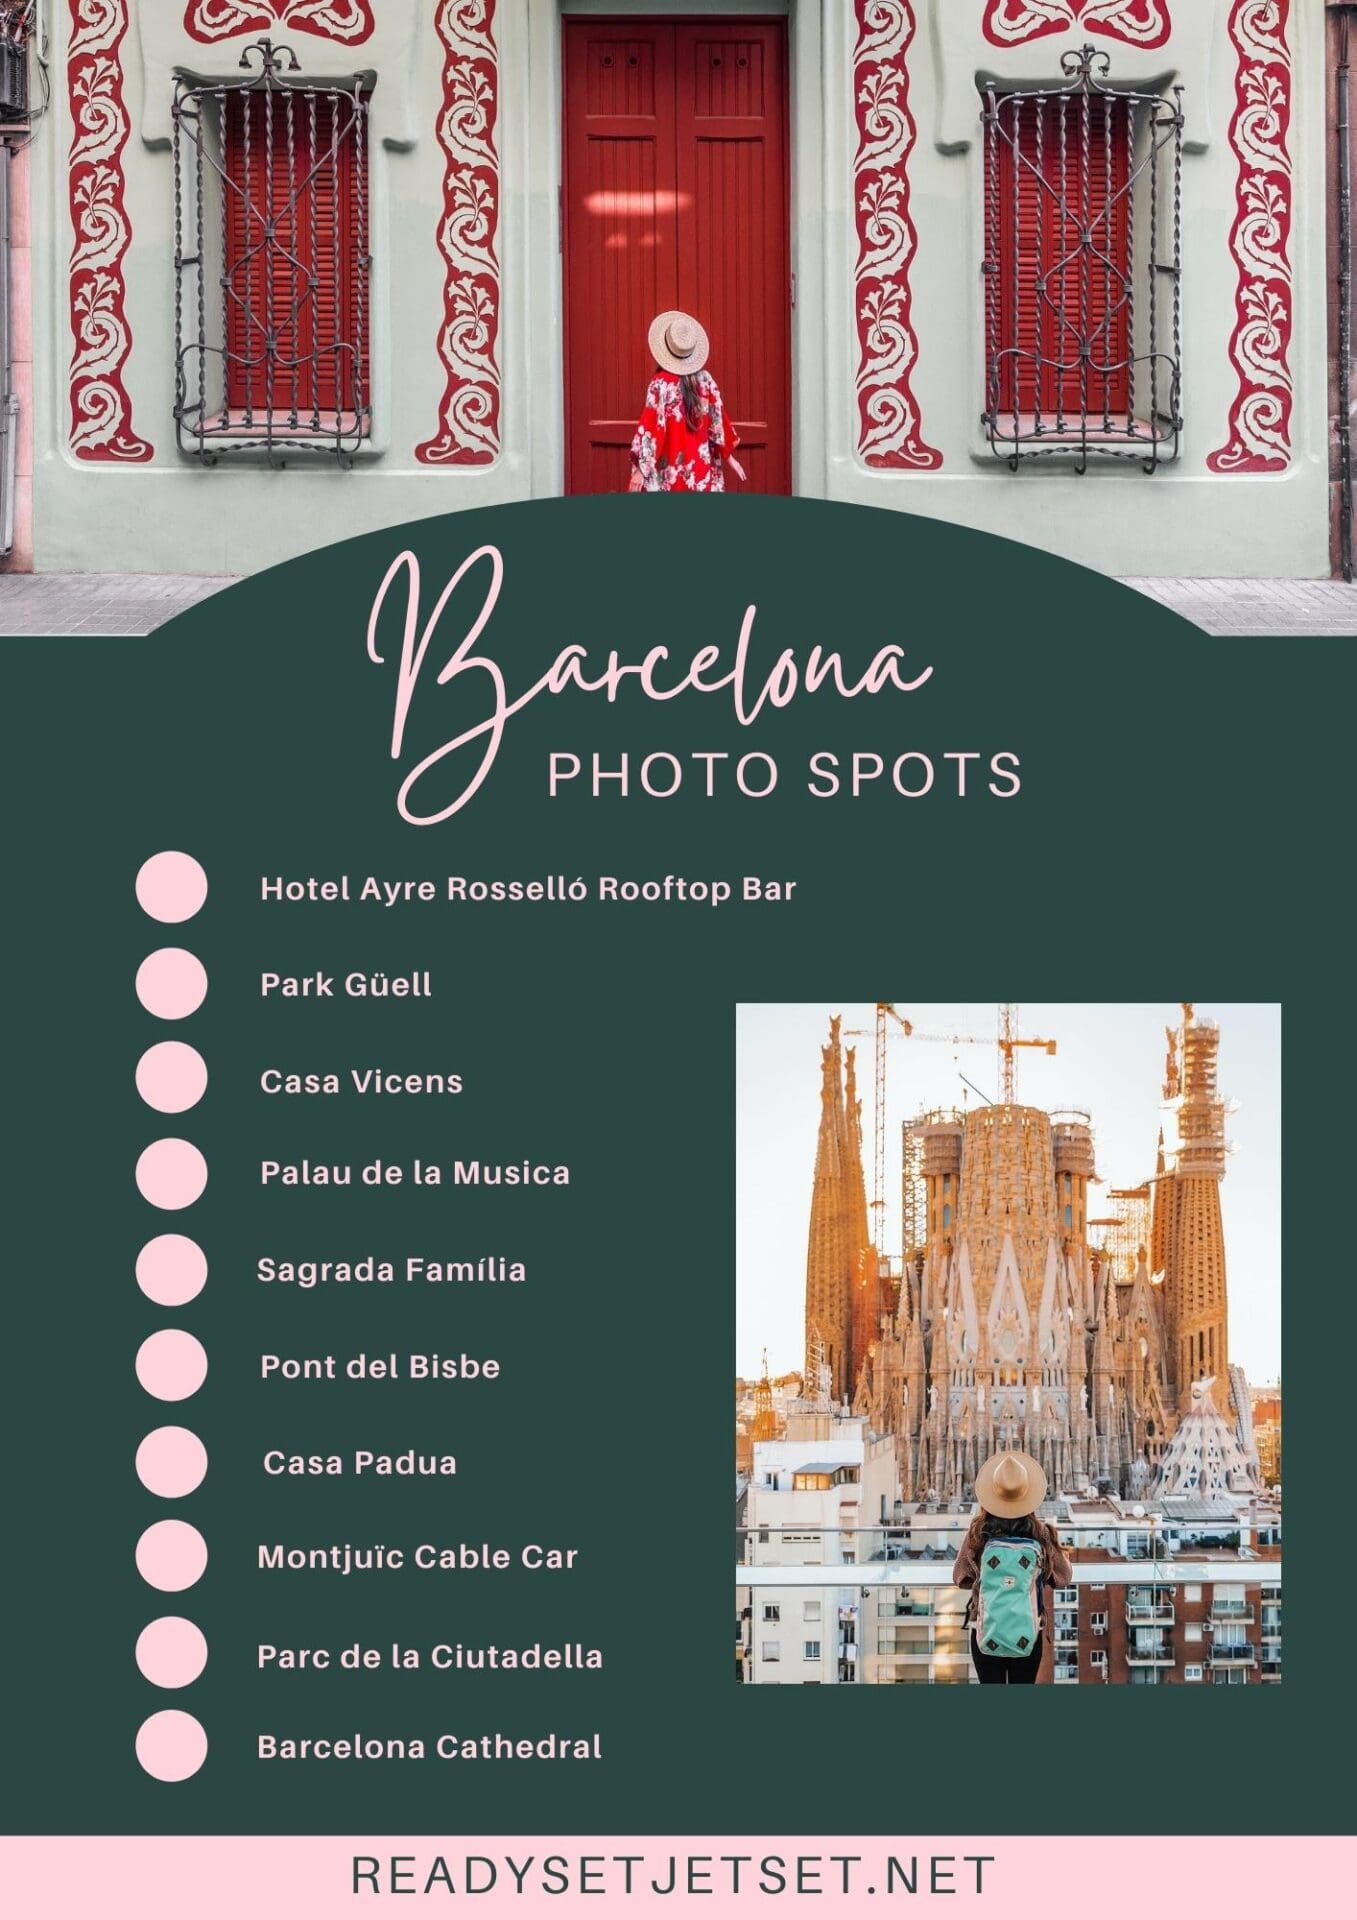 Here's a mini guide to save of the 10 Best Barcelona Photo Spots!